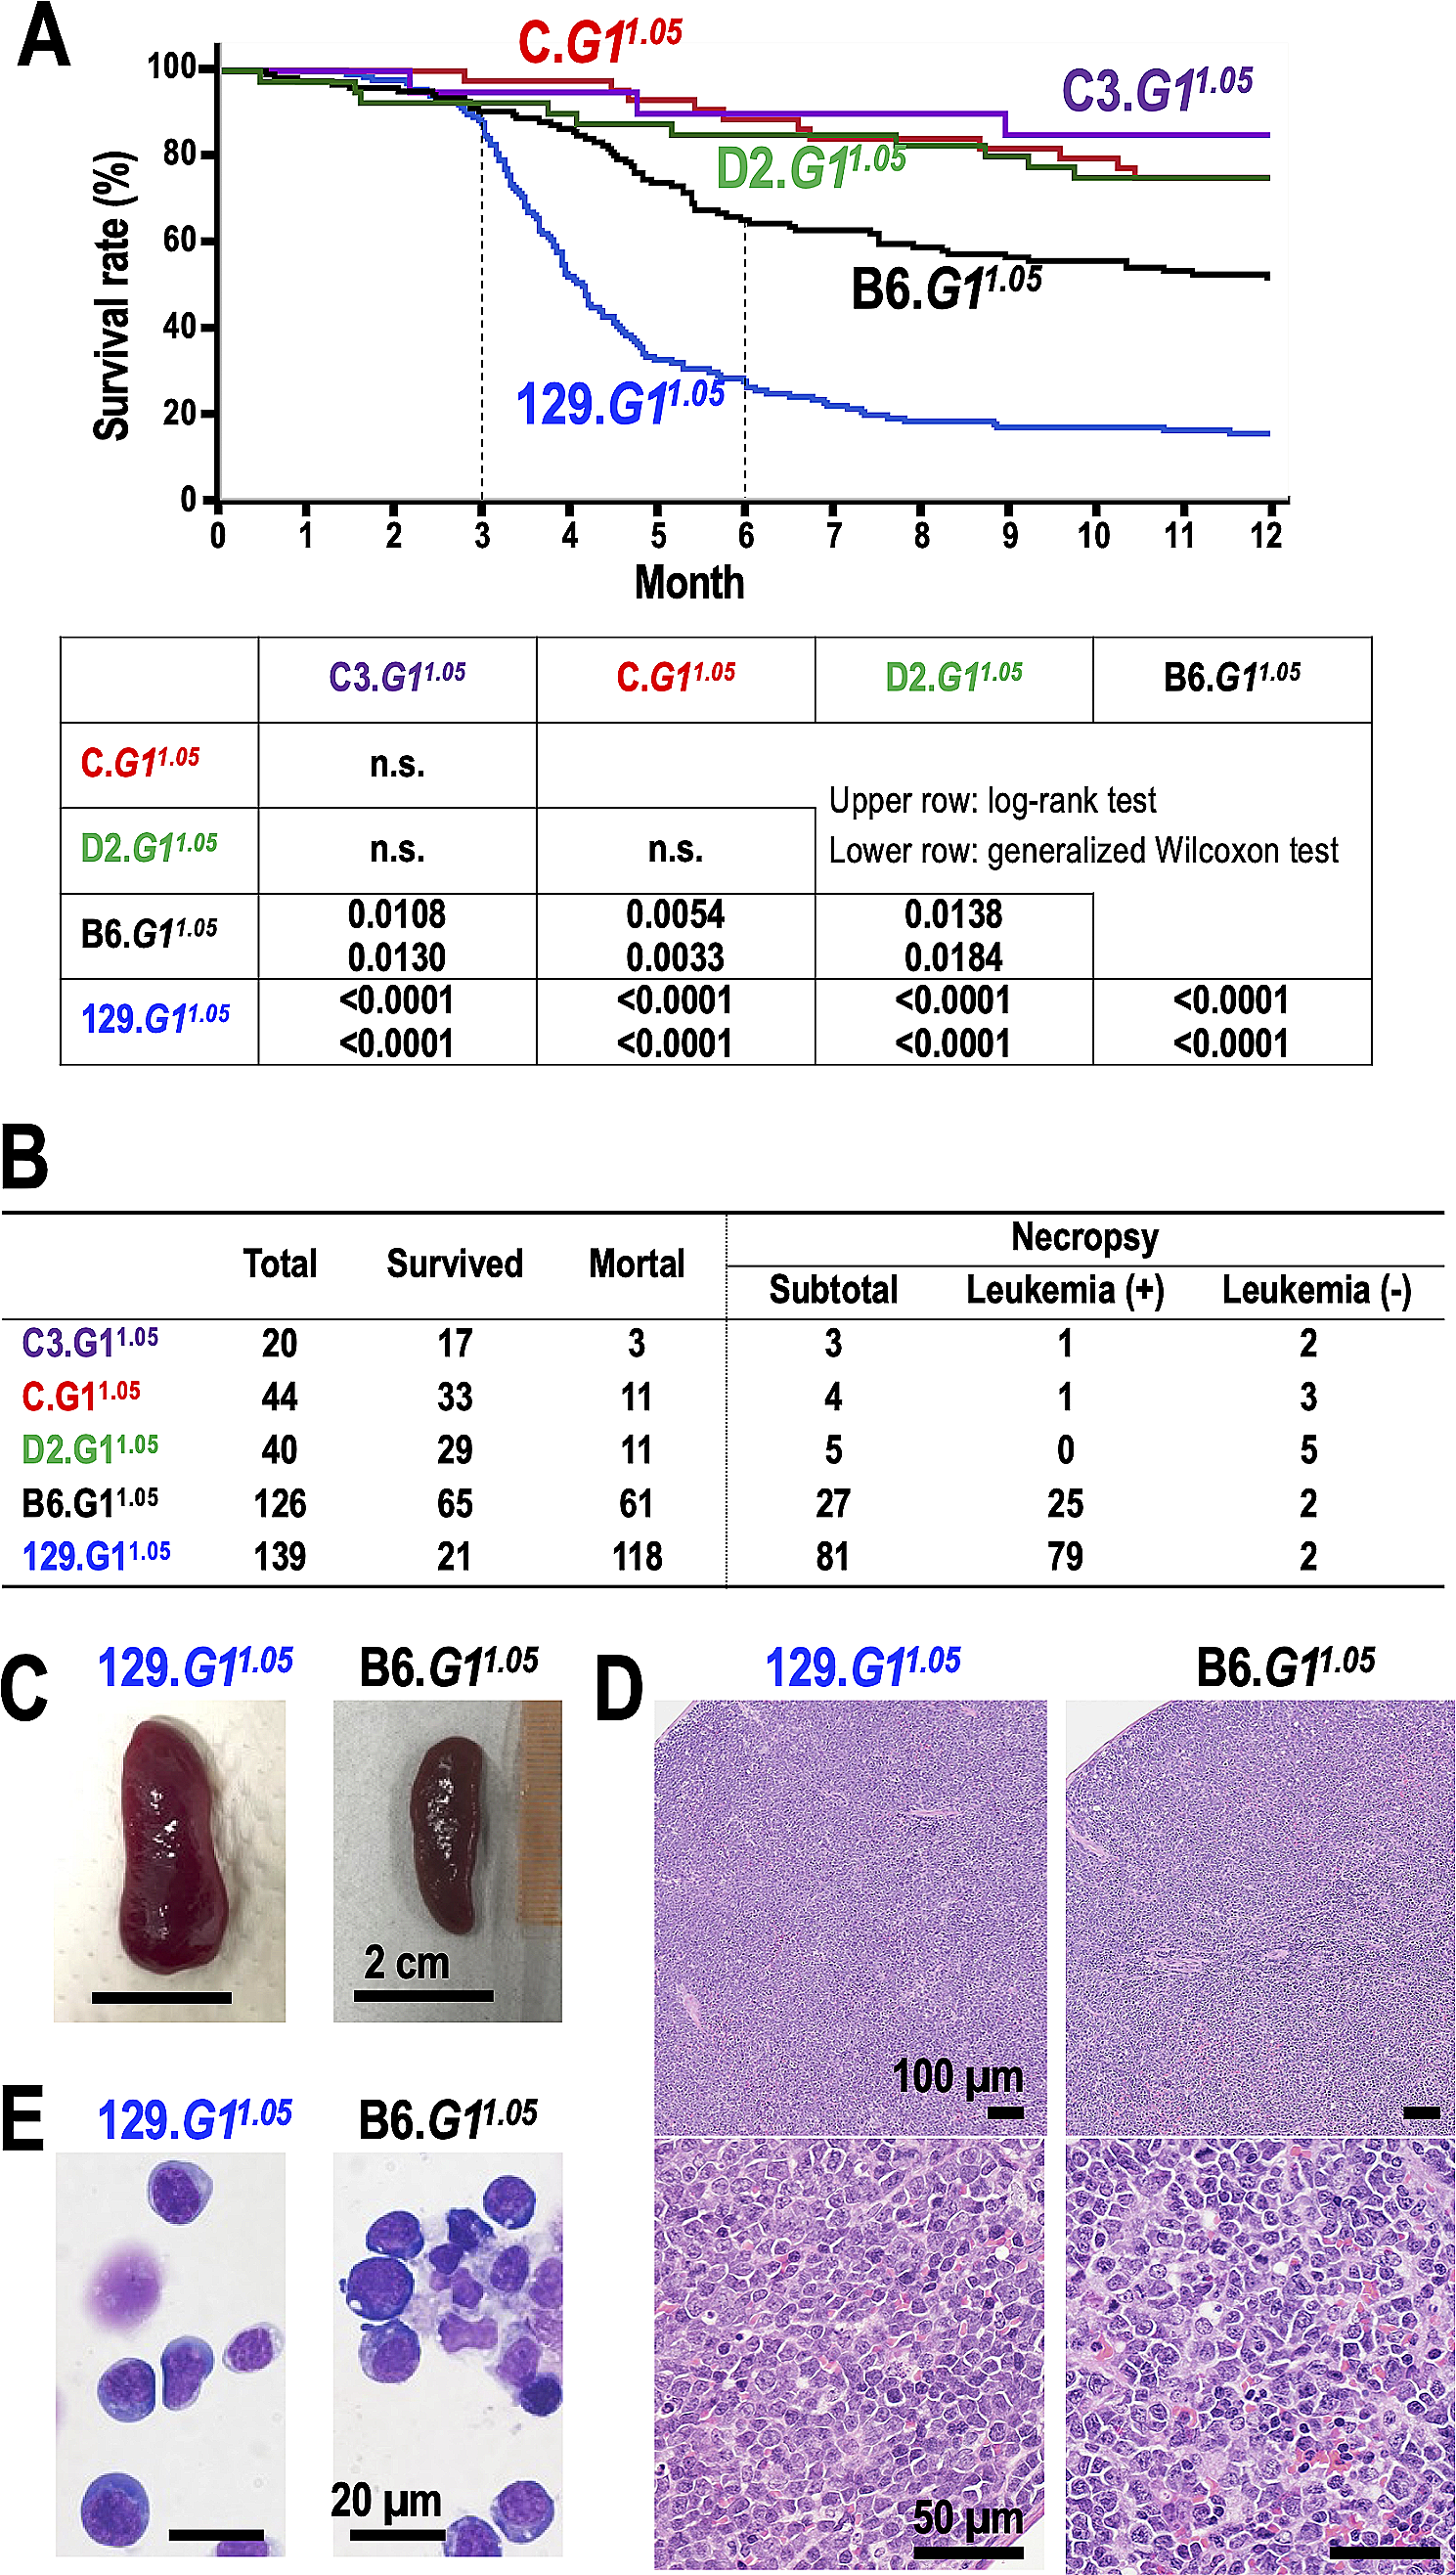 Strain-dependent modifiers exacerbate familial leukemia caused by GATA1-deficiency